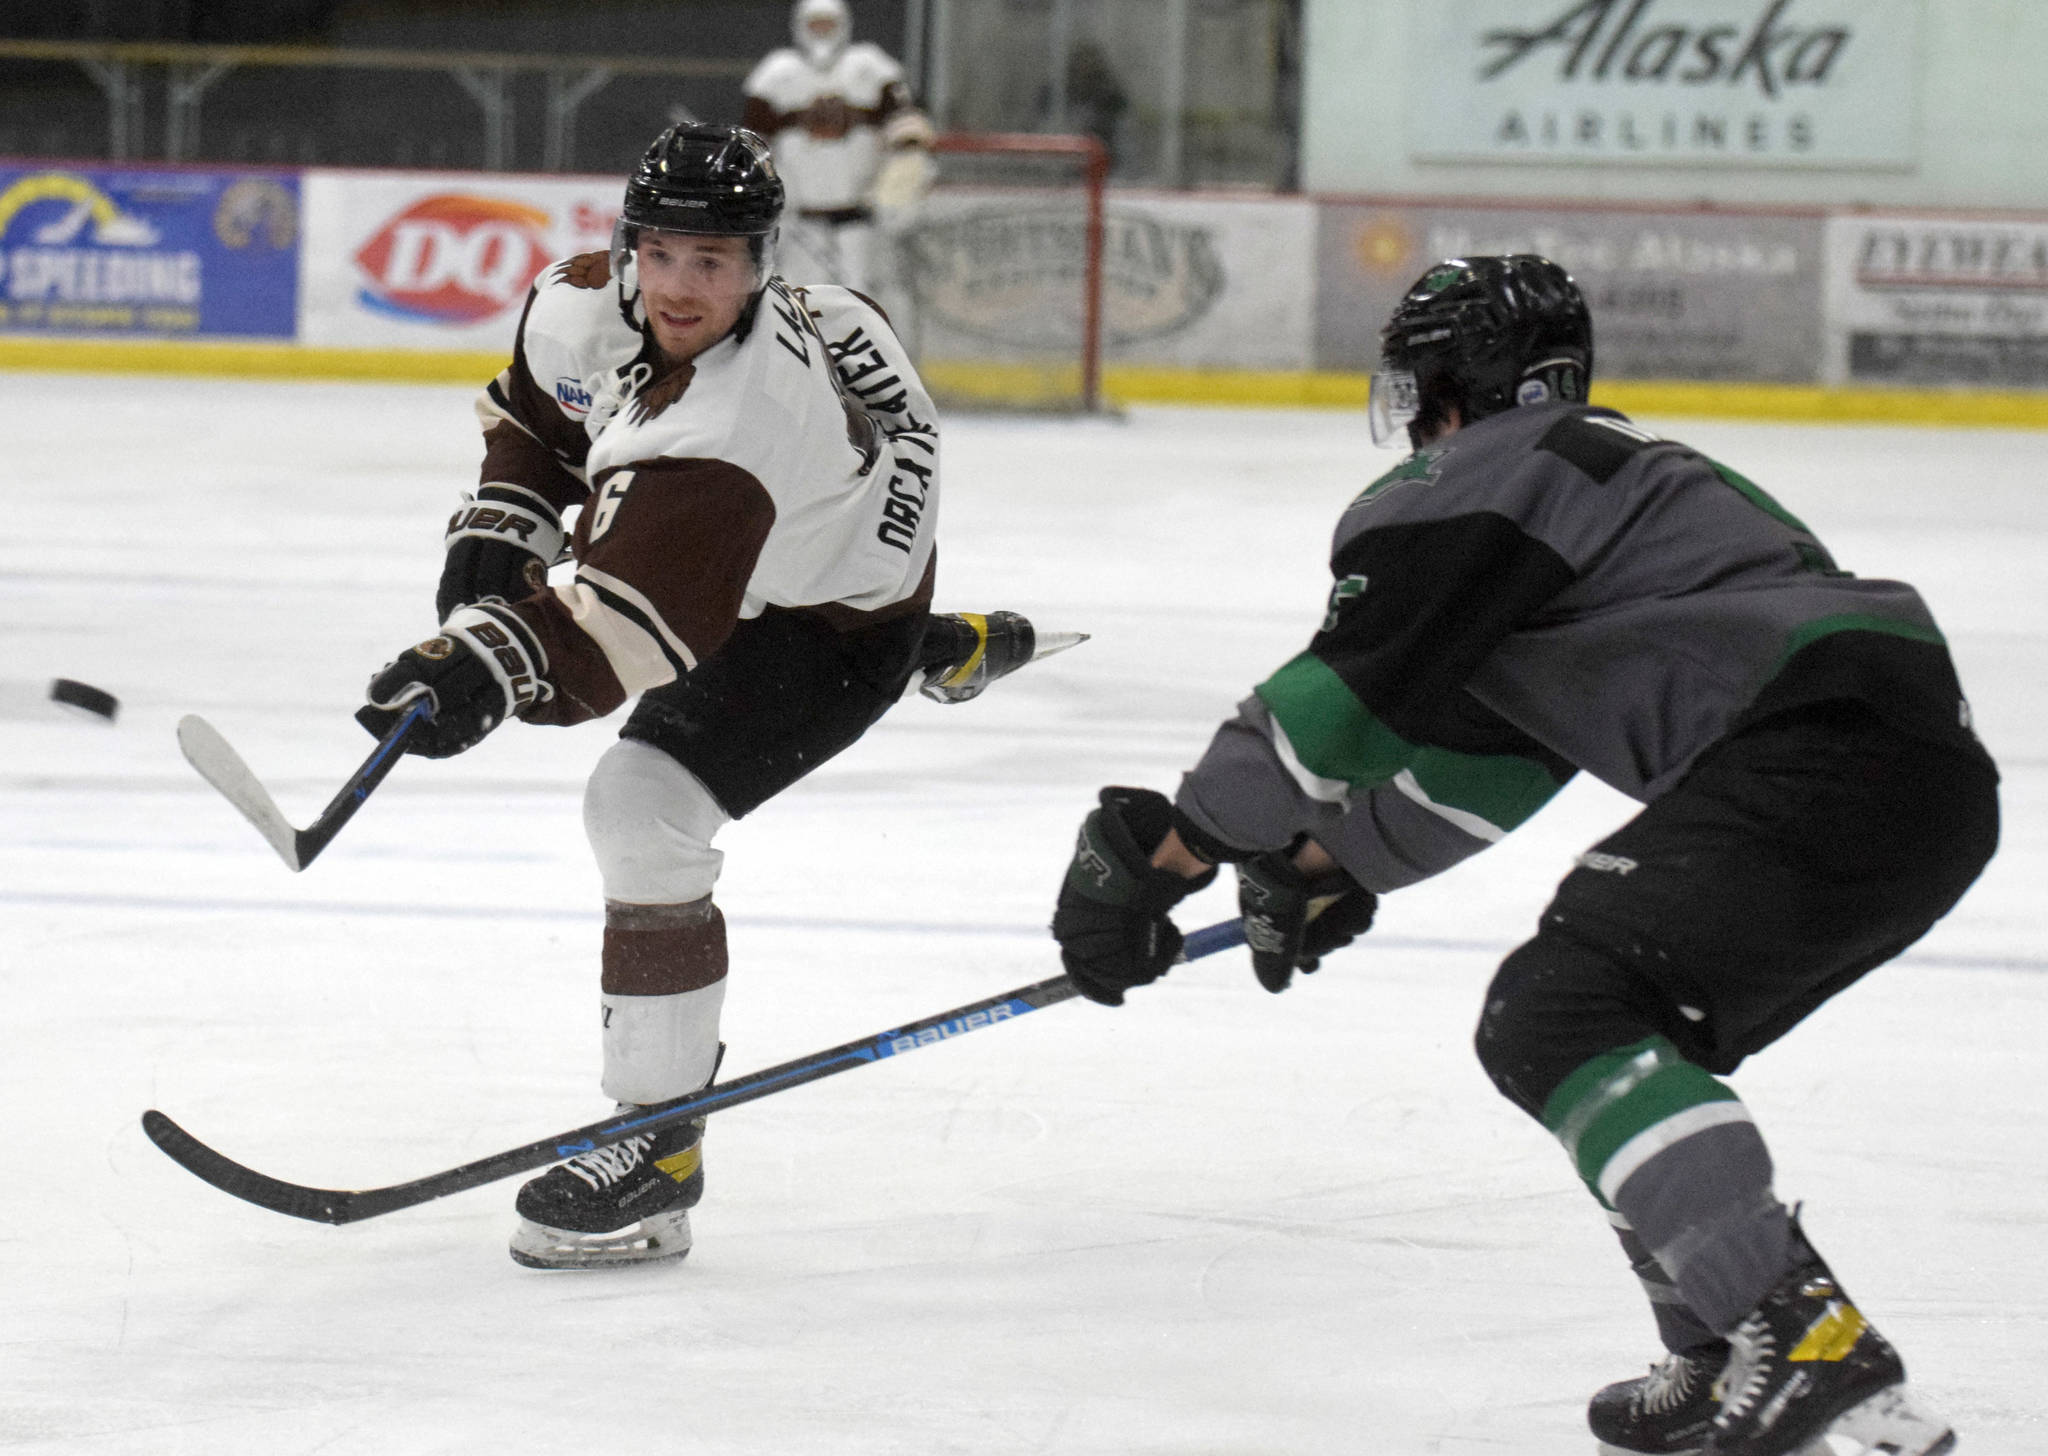 Kenai River Brown Bears forward Brandon Lajoie, of Eagle River, shoots against the Chippewa (Wisconsin) Steel on Sunday, April 25, 2021, at the Soldotna Regional Sports Complex in Soldotna, Alaska. (Photo by Jeff Helminiak/Peninsula Clarion)